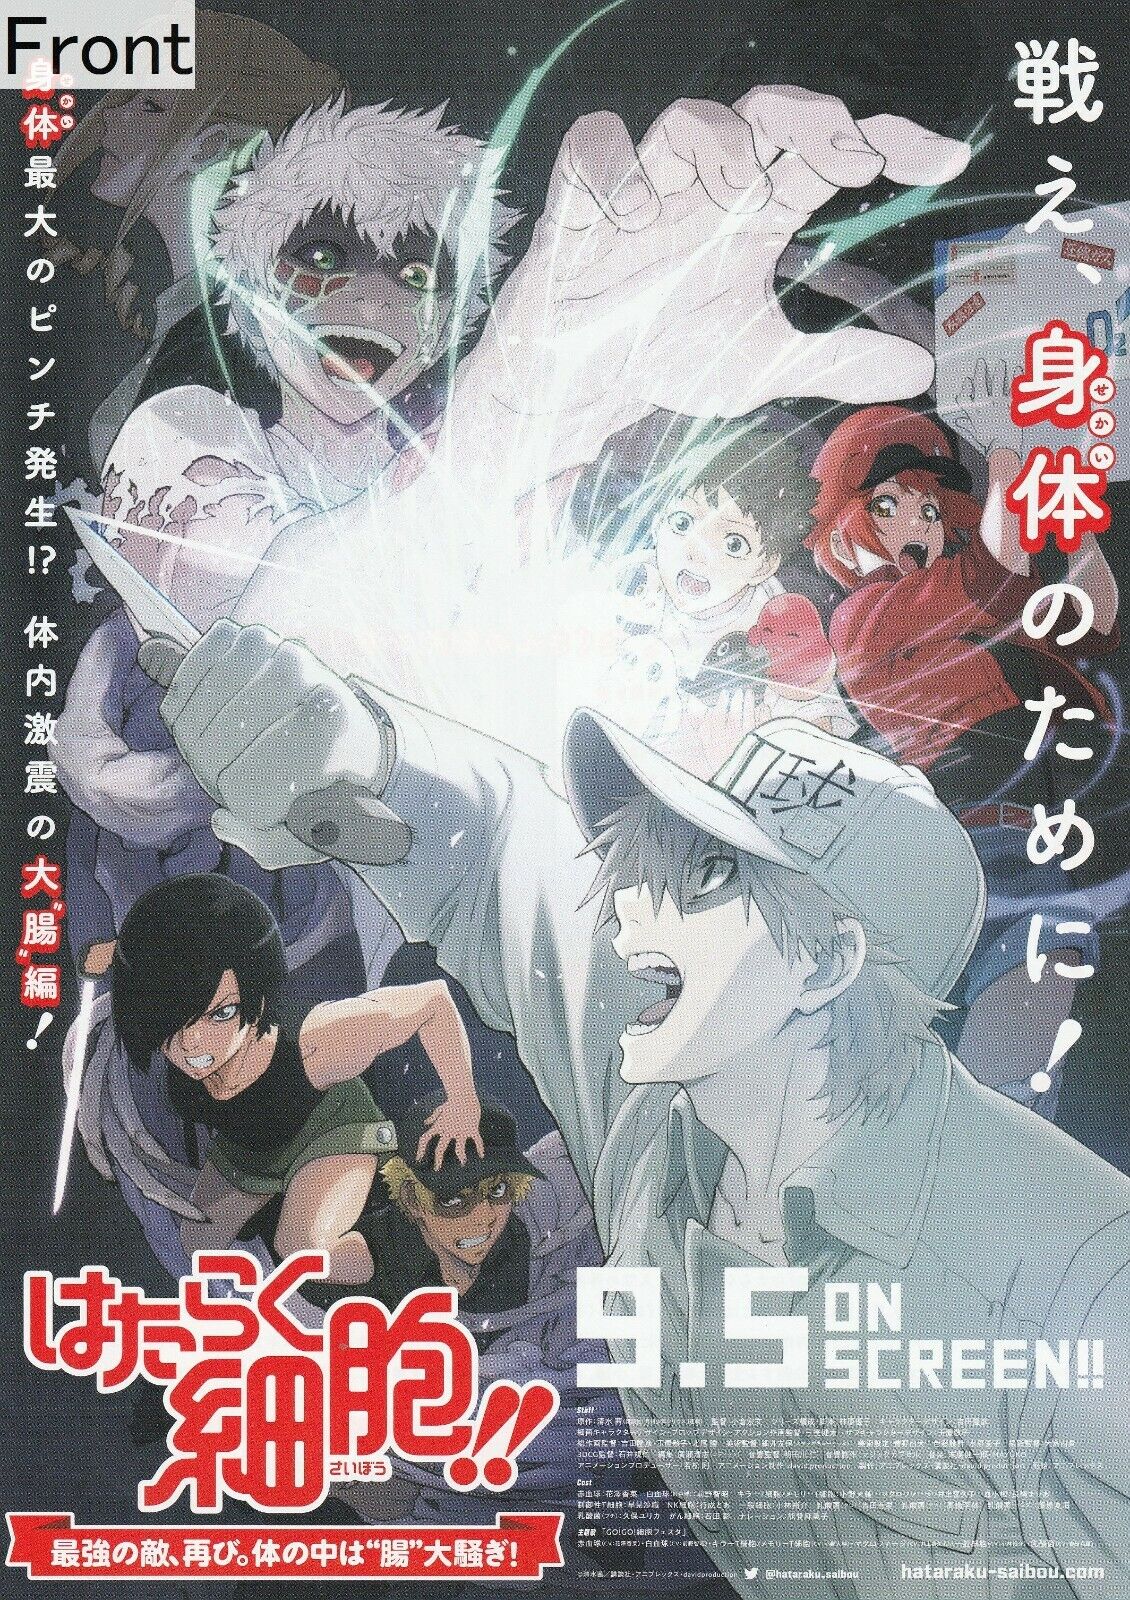 Cells at Work (2020 Japanese Animation Film) Promotional Poster